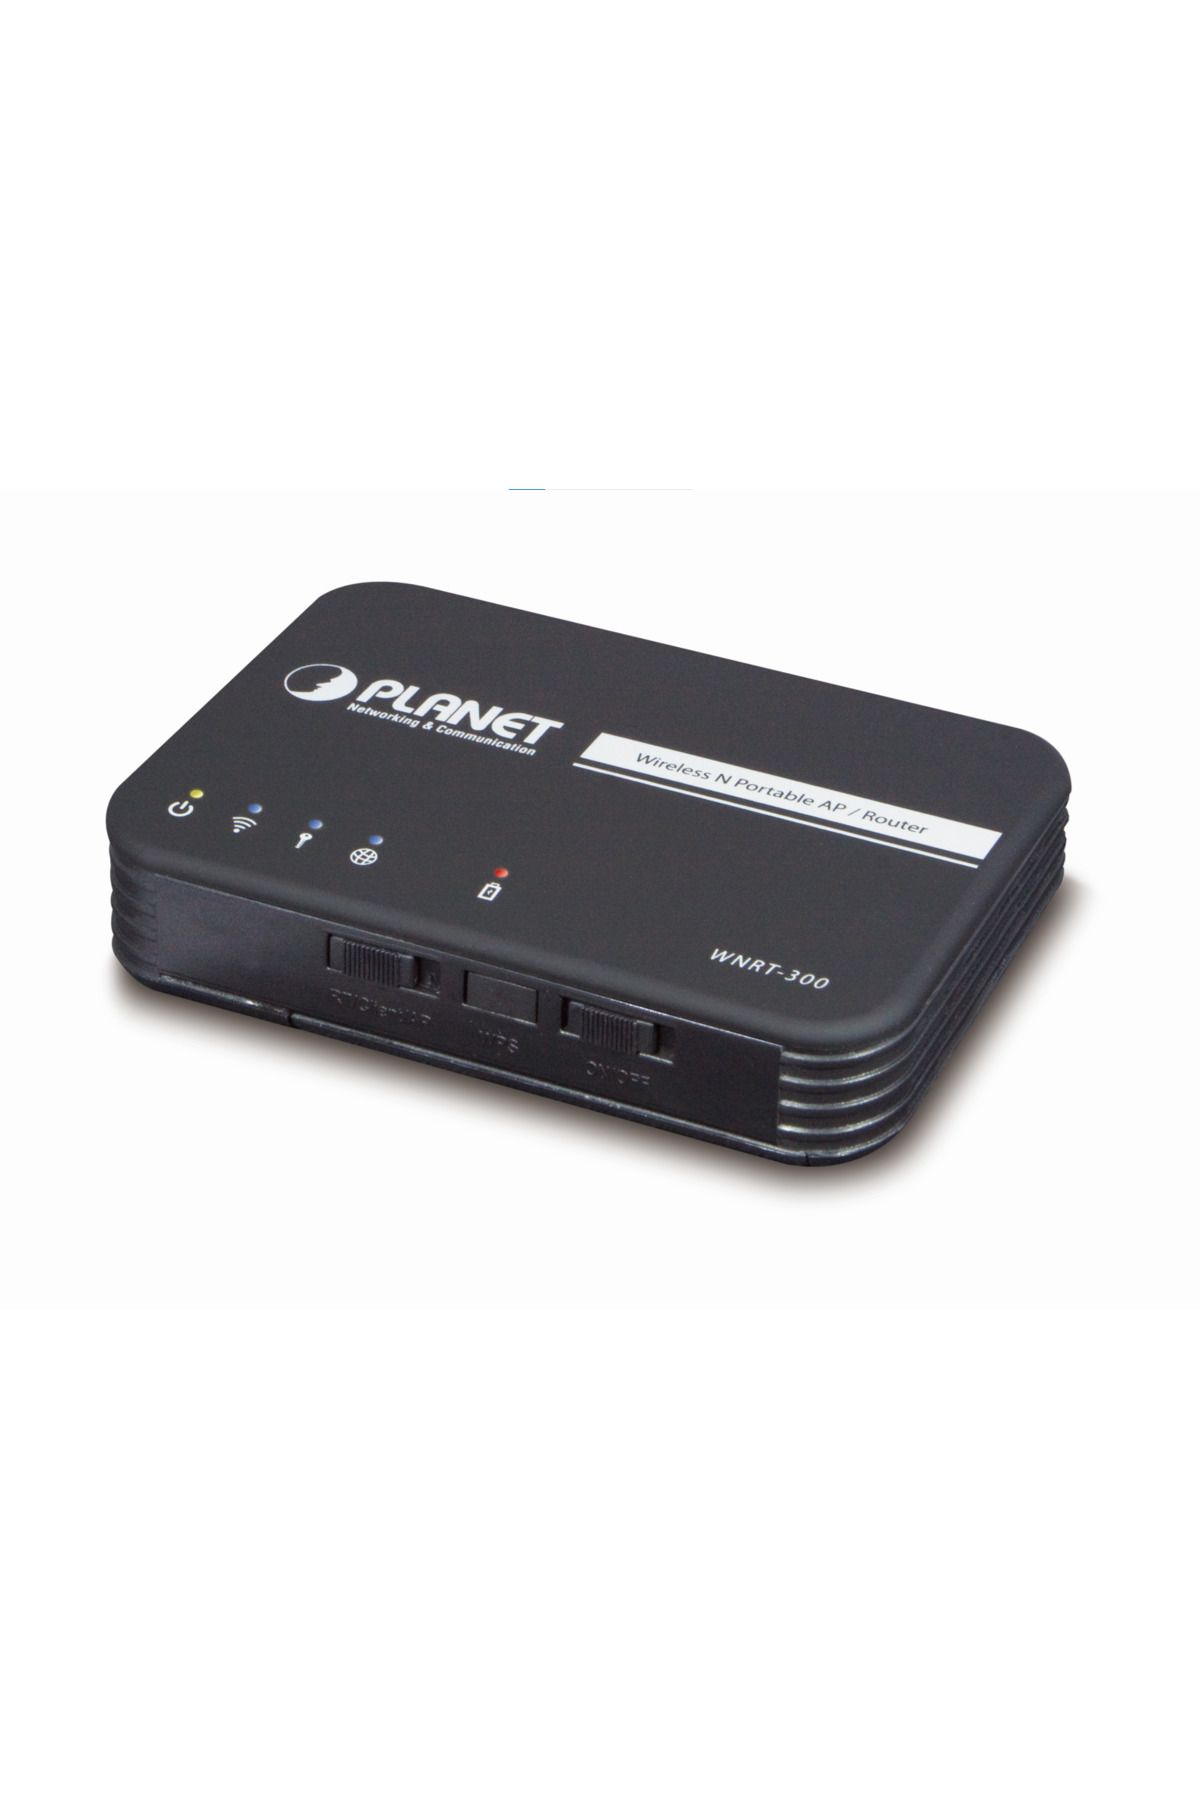 Planet 150Mbps 802.11n Wireless Portable AP/Router